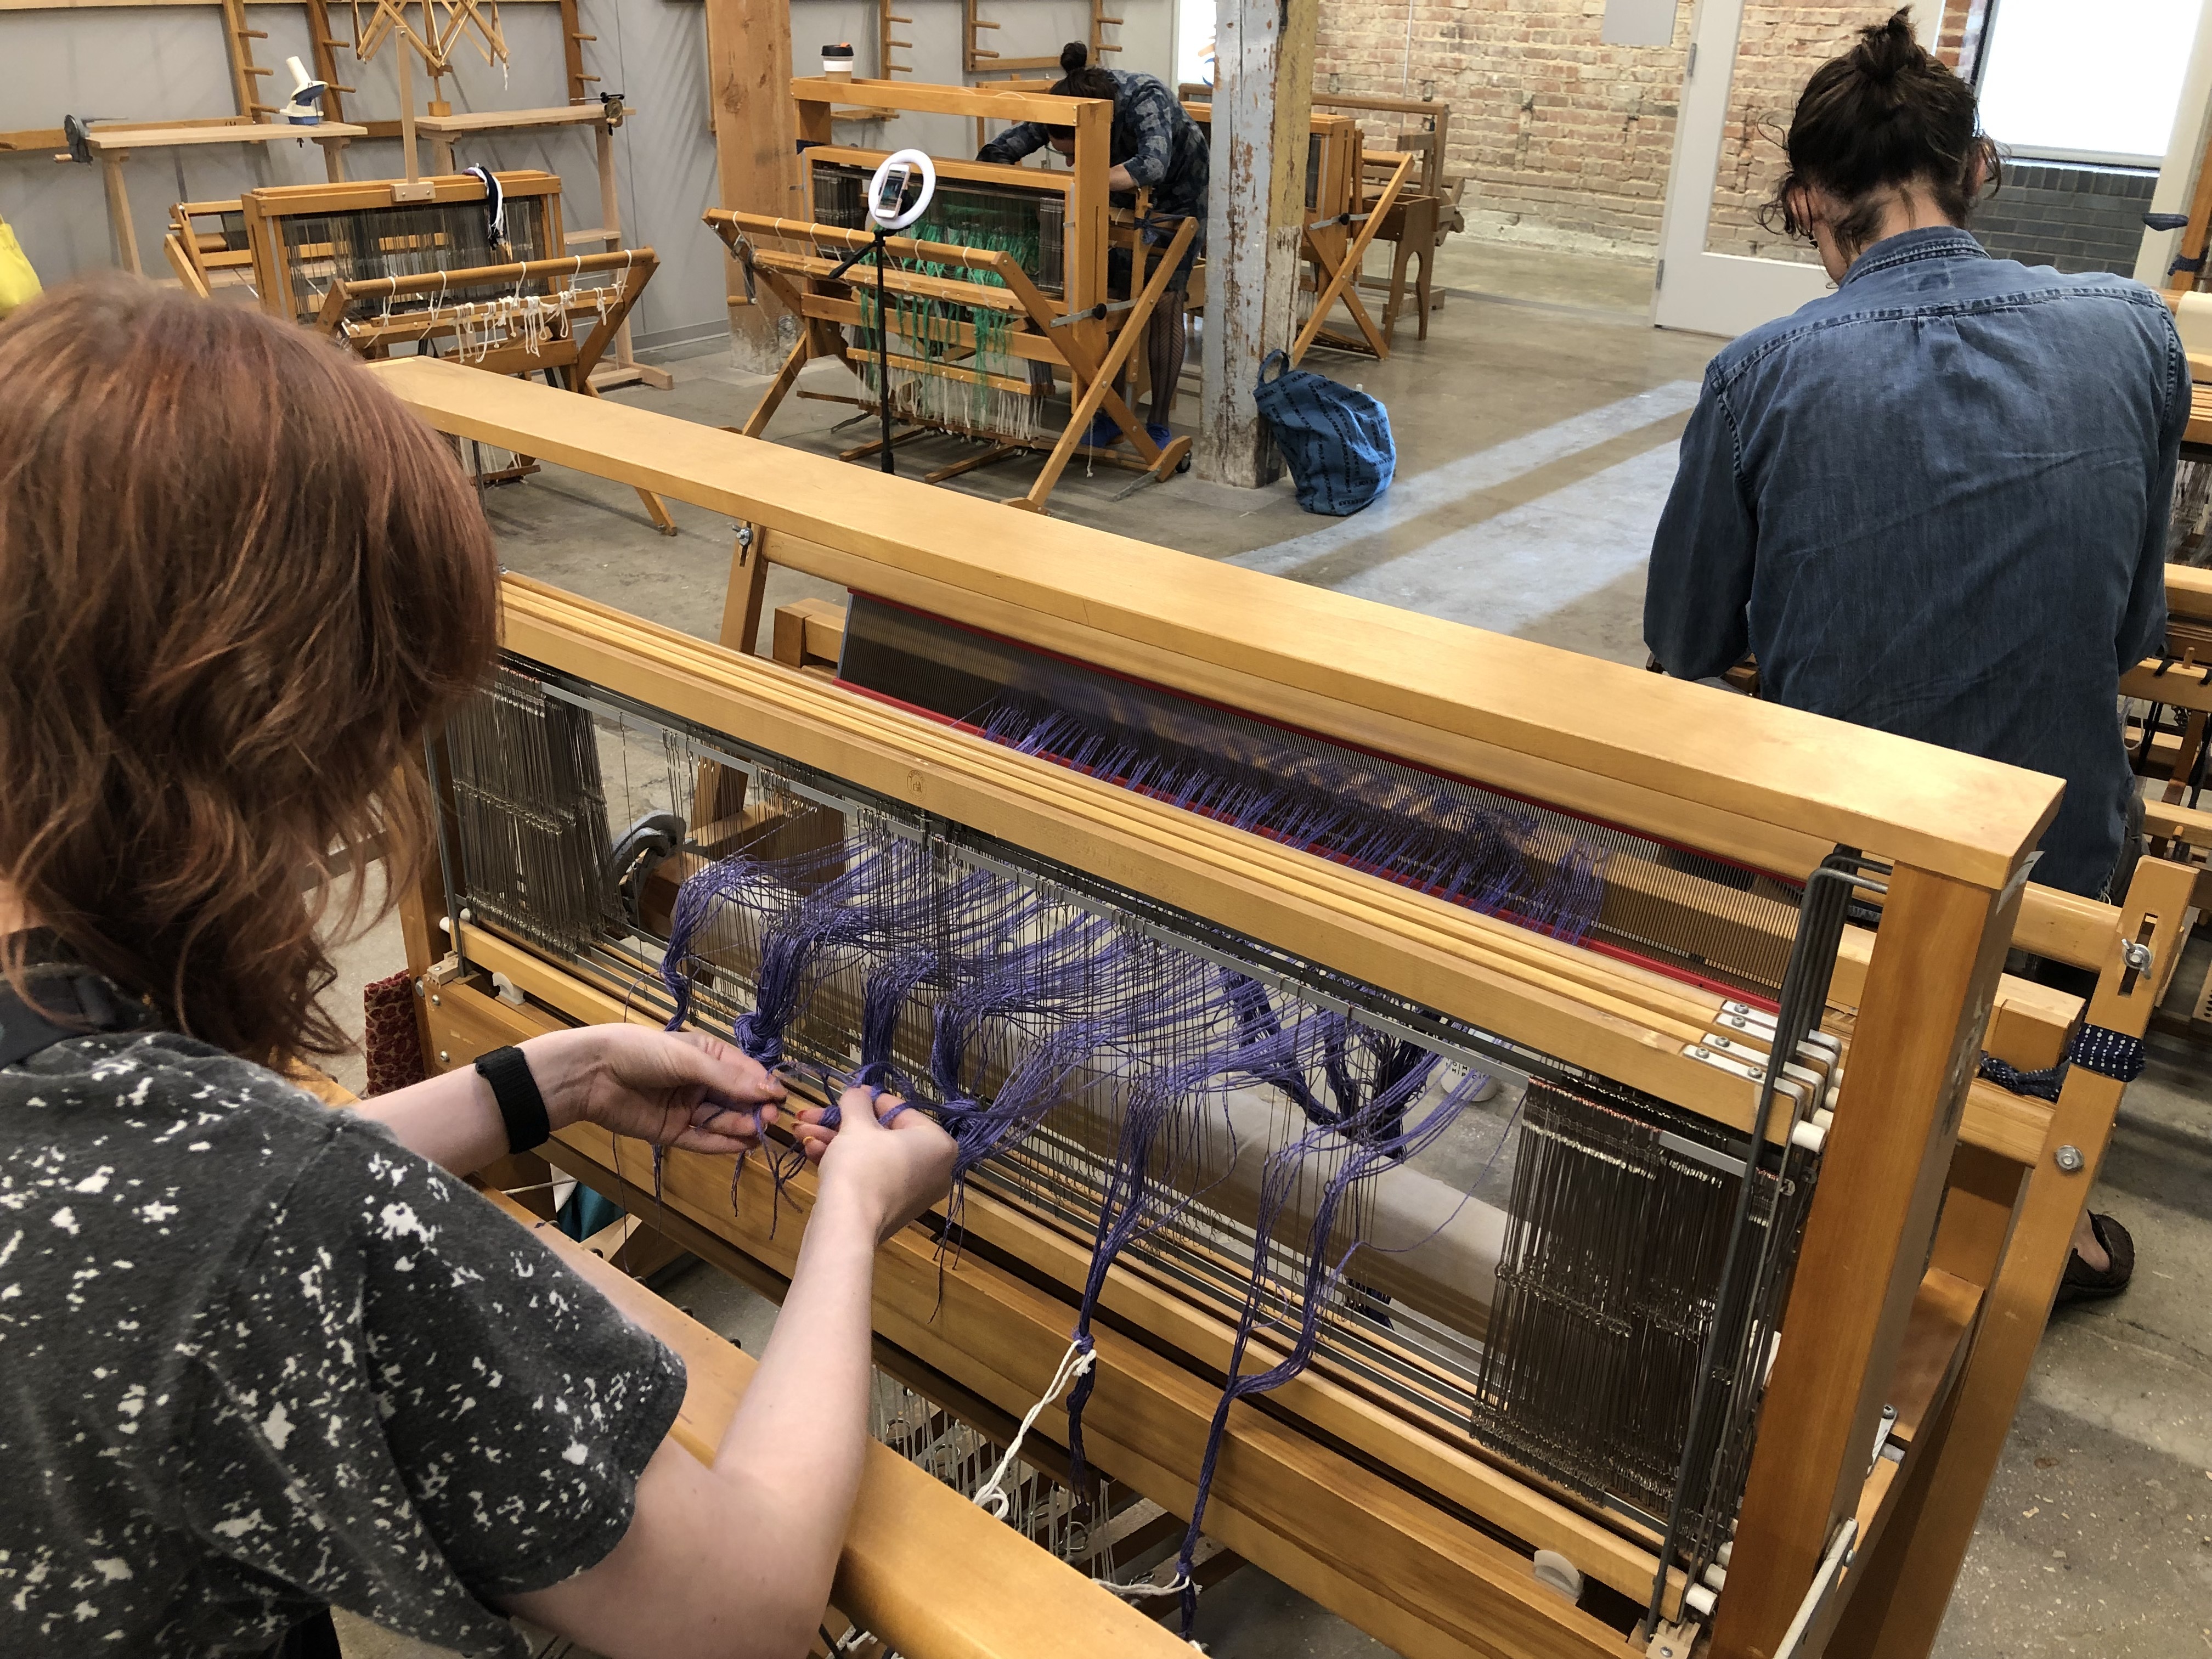 There are three people working on three, separate looms. Two have their backs to the camera and we can see one is working with purple thread as they pull it through the loom. In the back, the third person is facing us, bent over the loom.